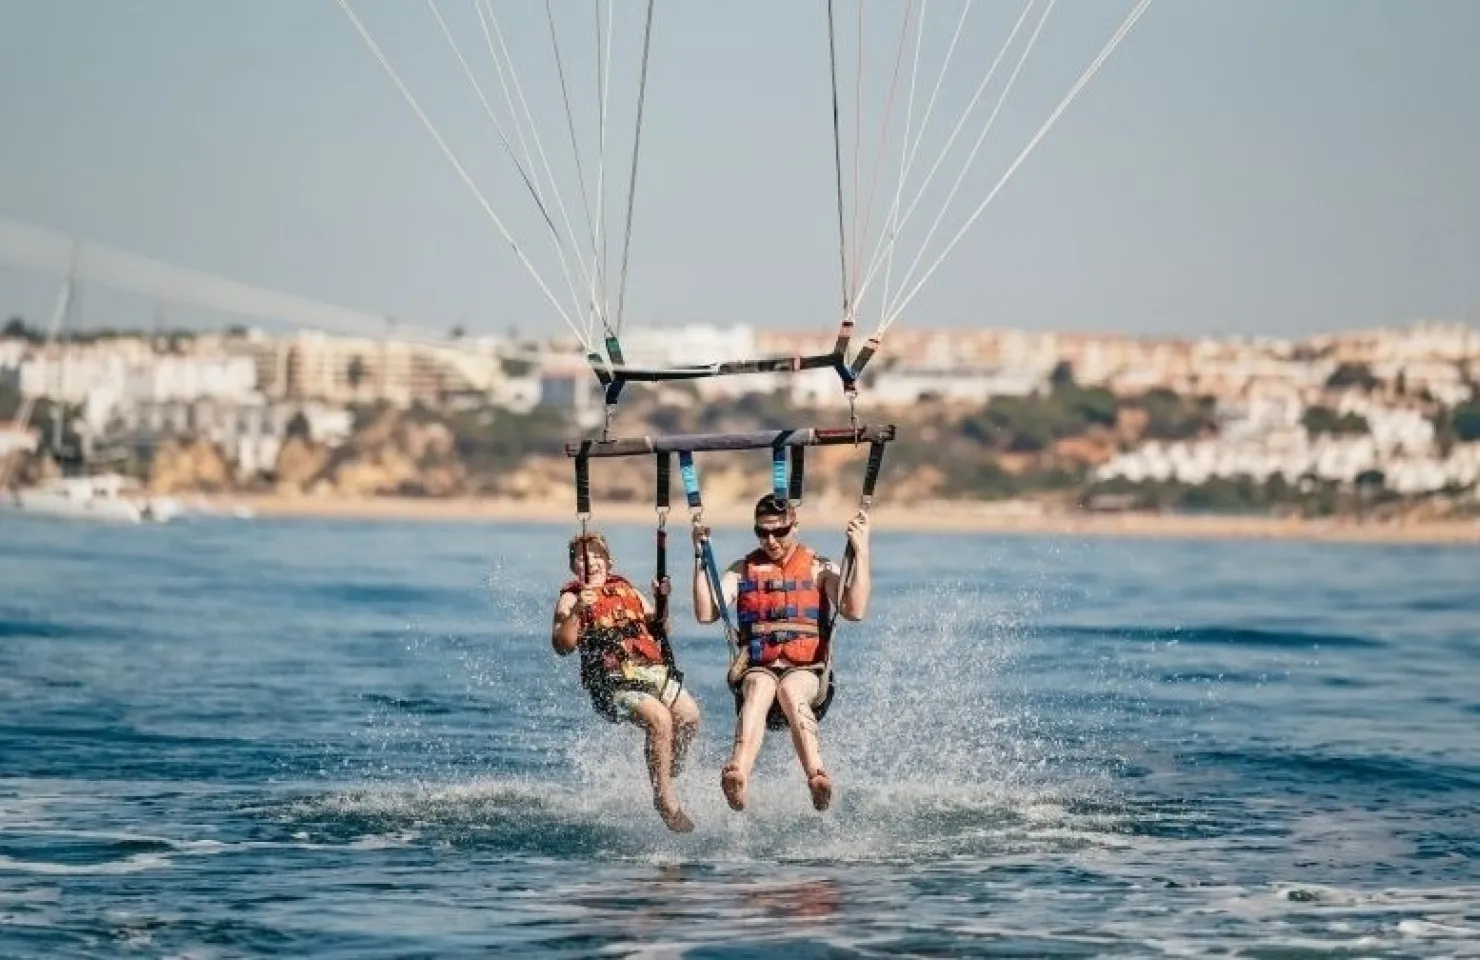 Dream Wave Parasailing - Things to do In Albufeira